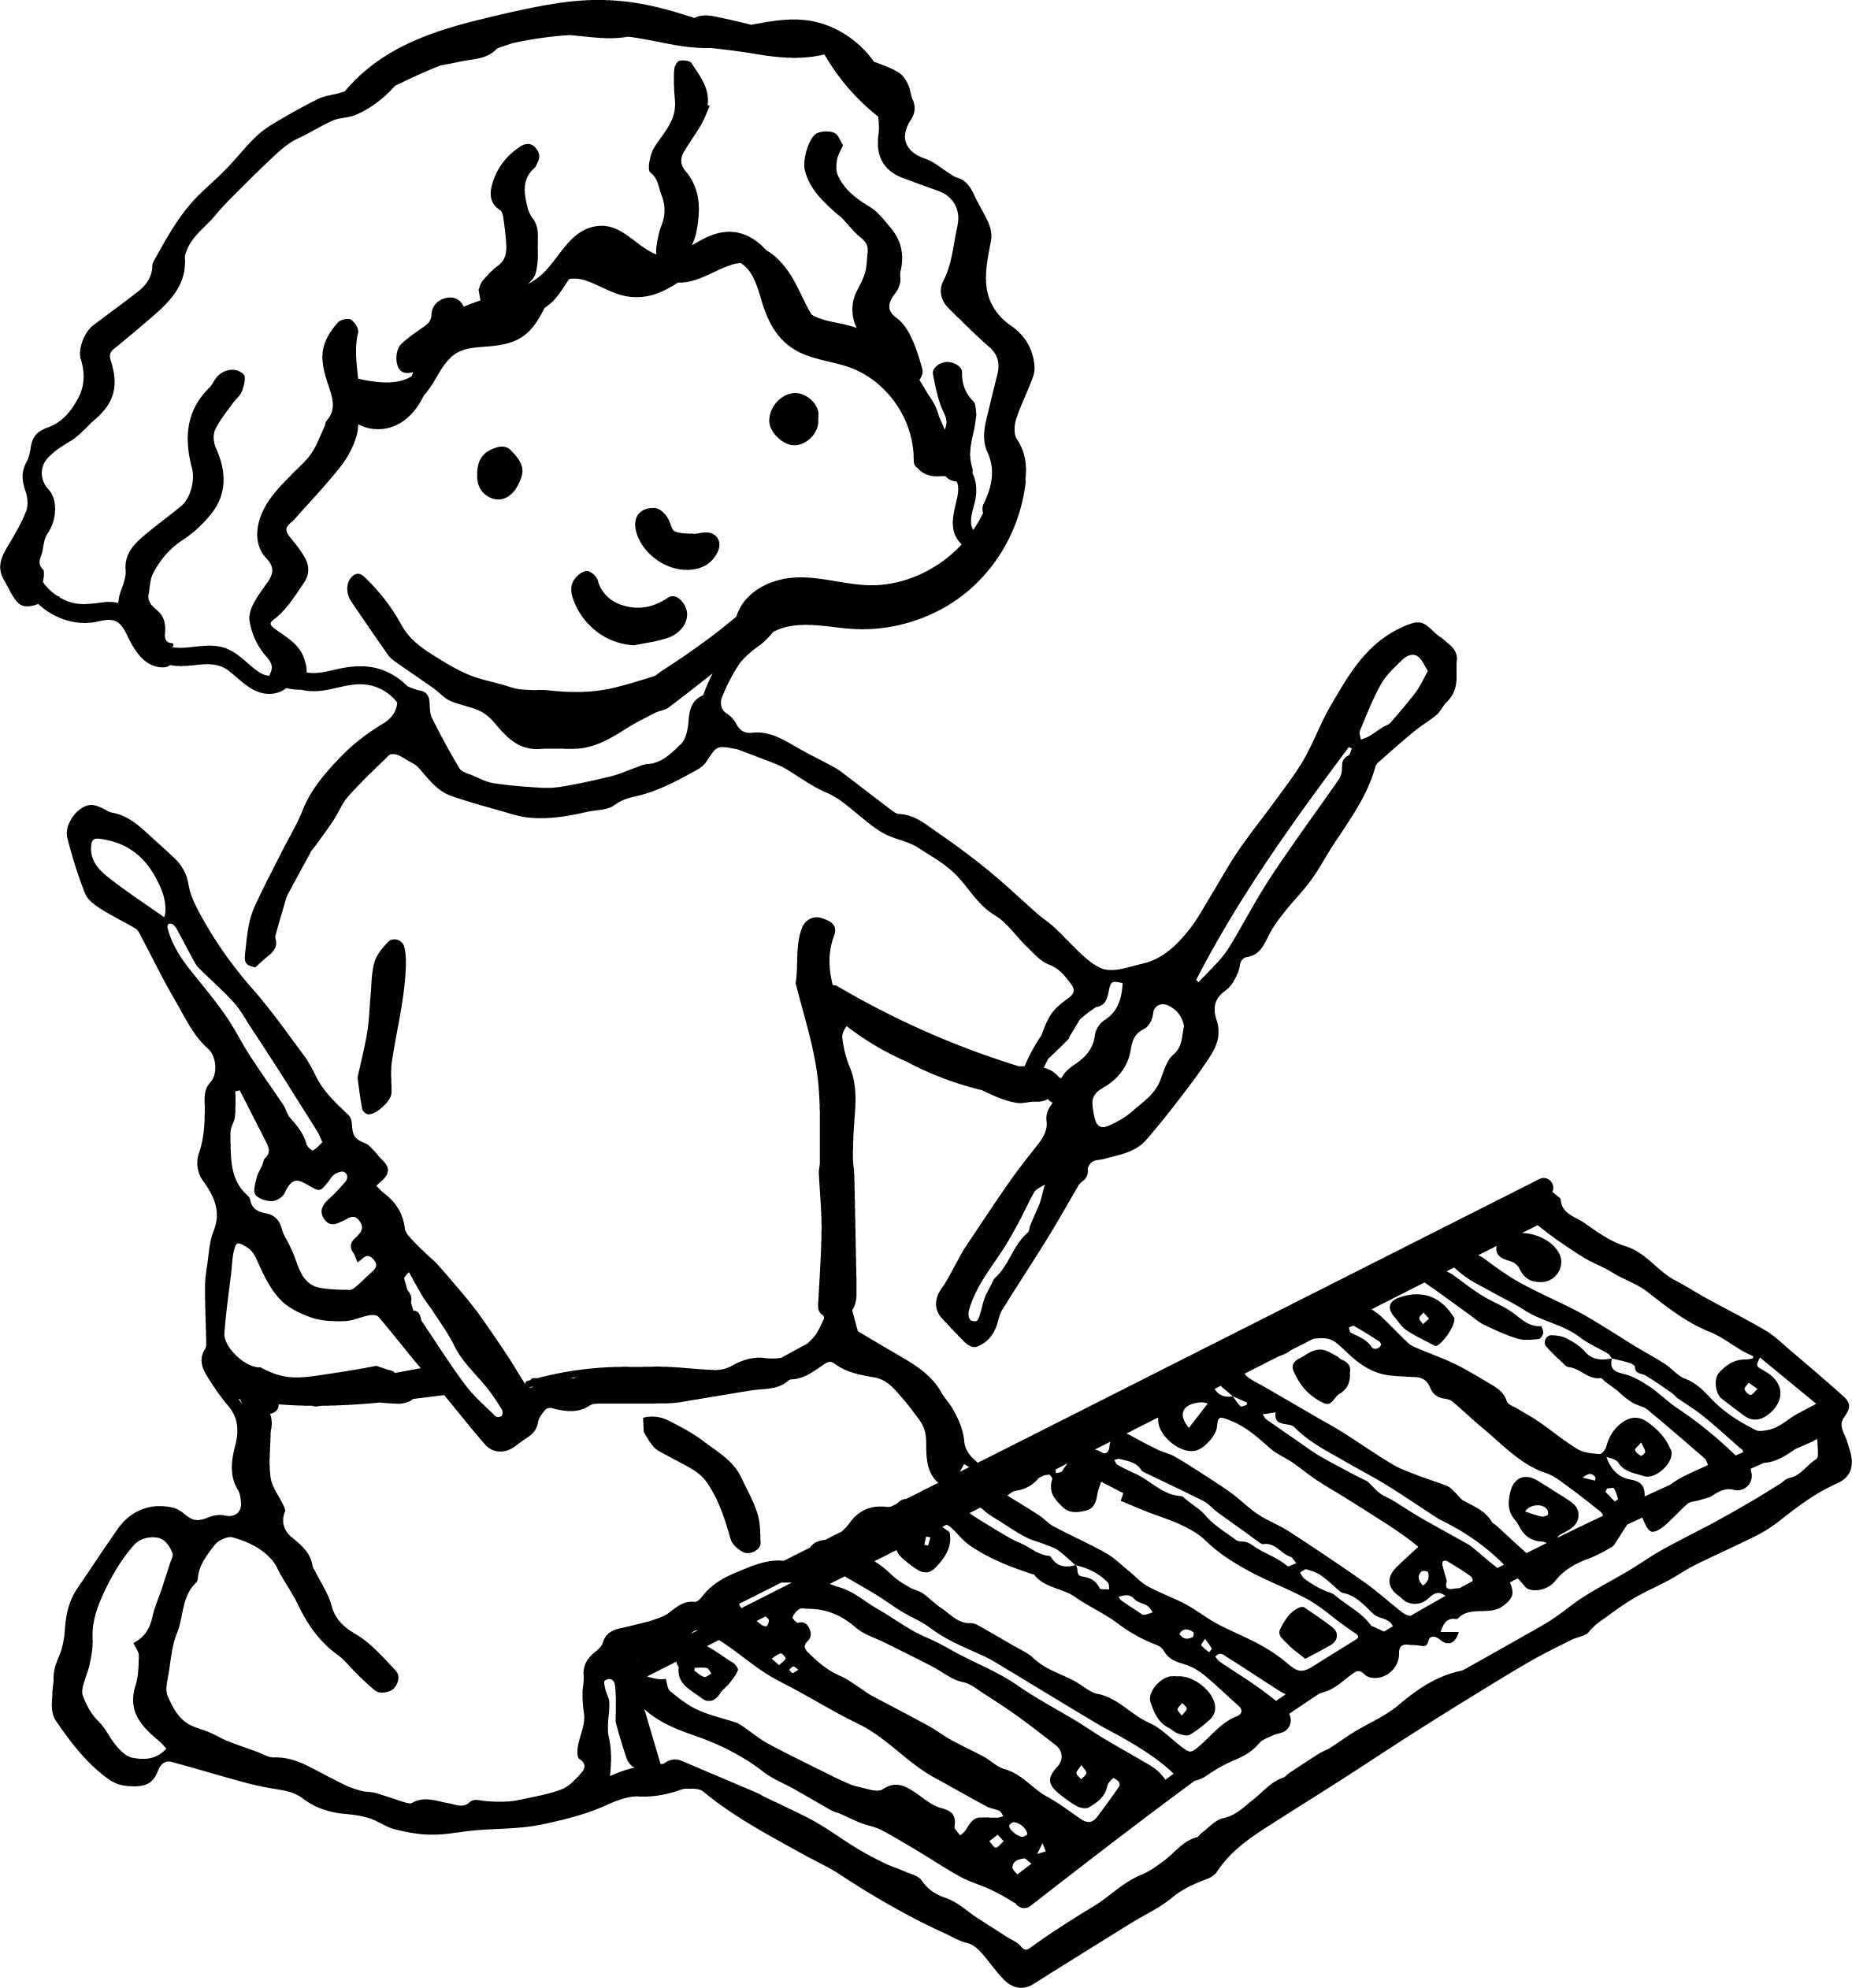 Xylophone Coloring Pages For Kids, Coloring 4 Kids Xylophone - Free